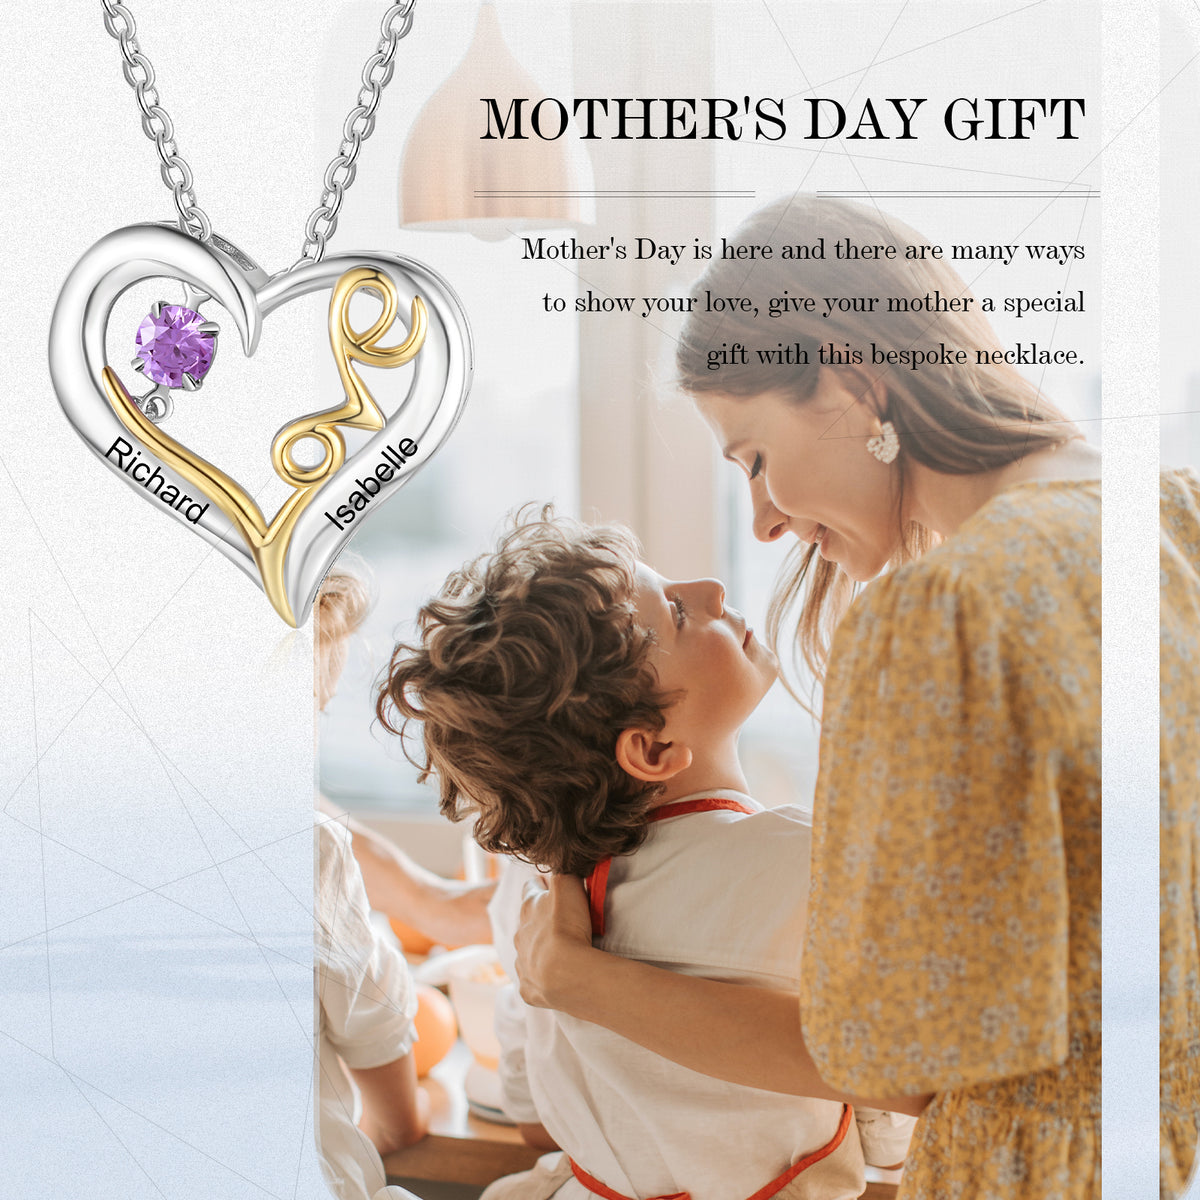 Custom Mother and Child Upside Down Heart Necklace with Engraved Name and Heart Simulated Birthstone.